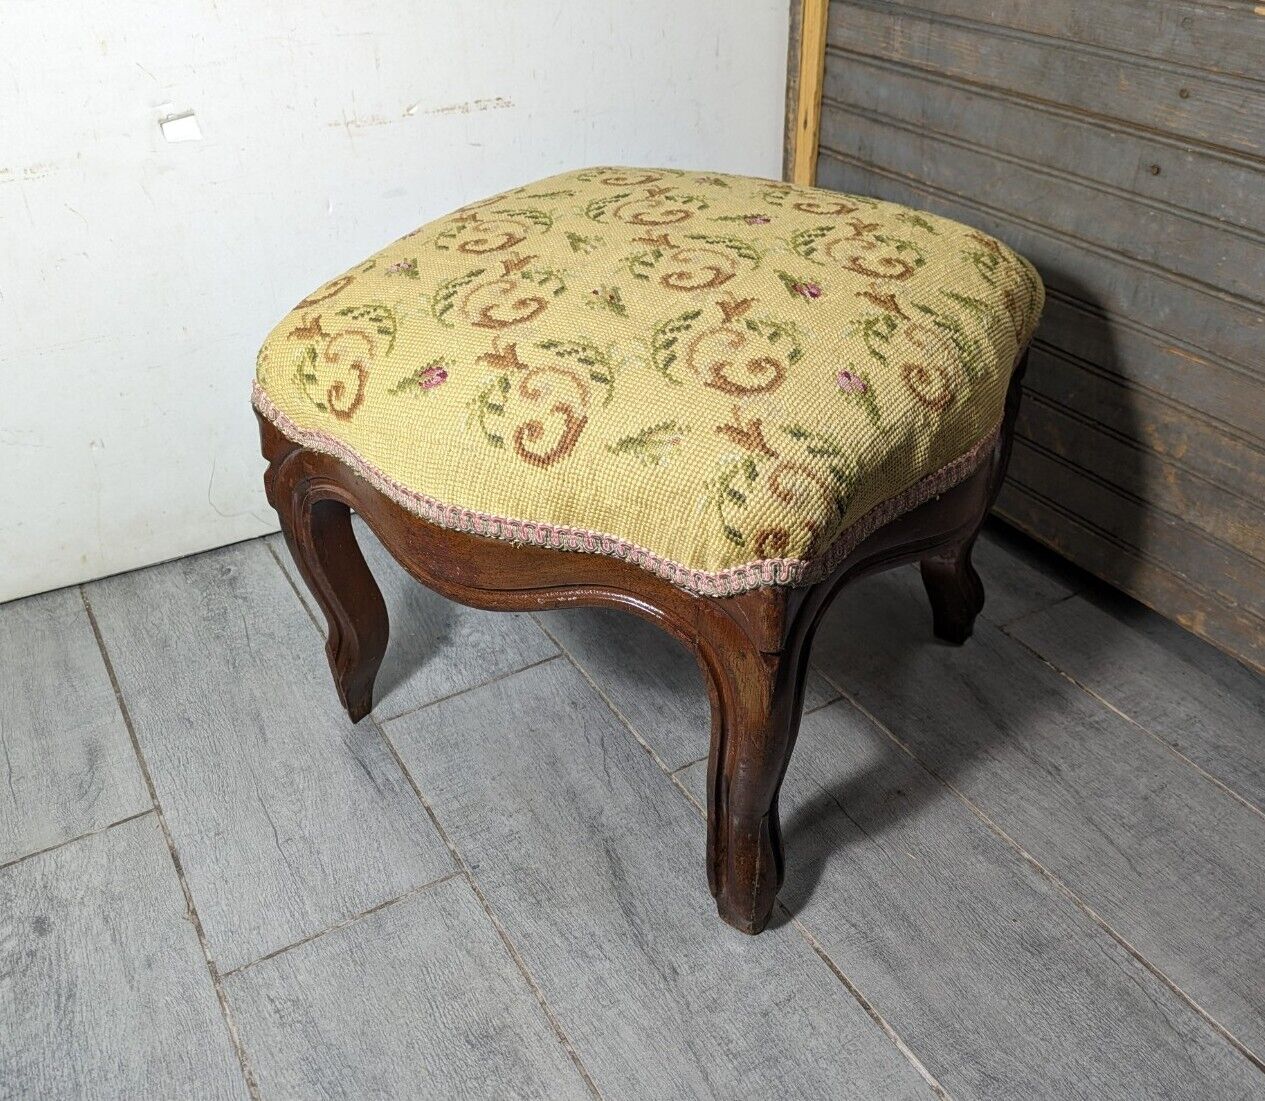 Antique French Provincial Needlepoint Footstool Ottoman Victorian Queen Anne